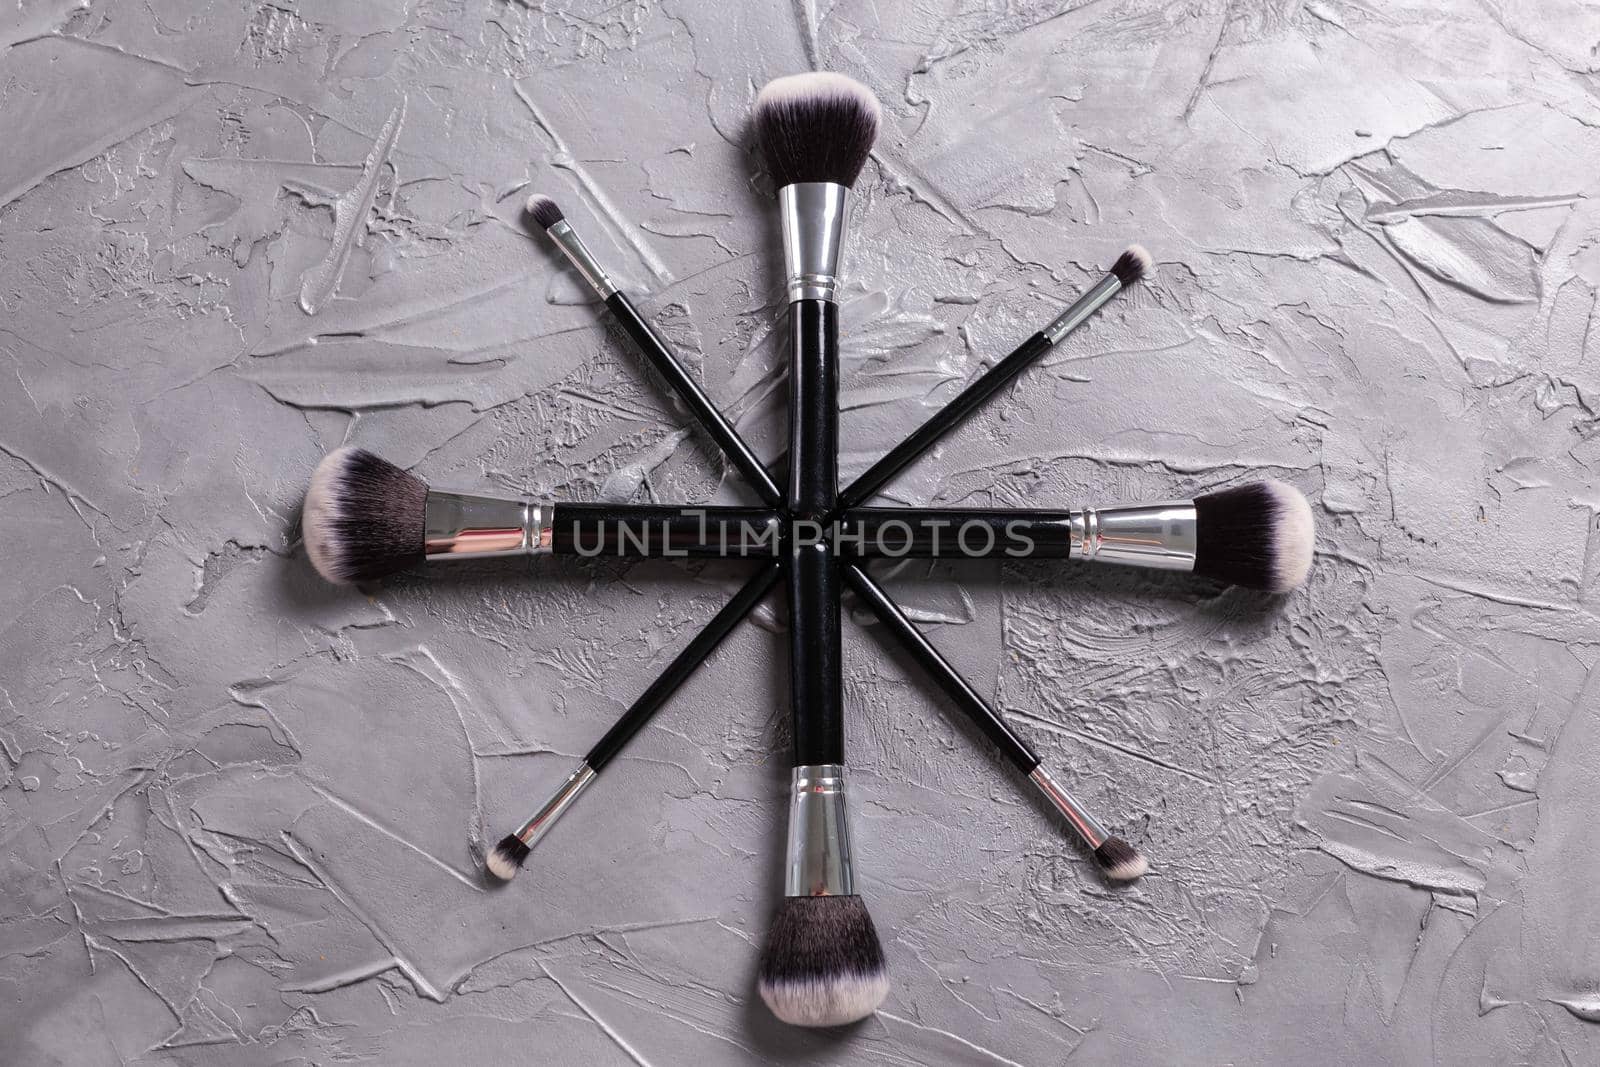 Top view of make-up brushes on grey background by Satura86